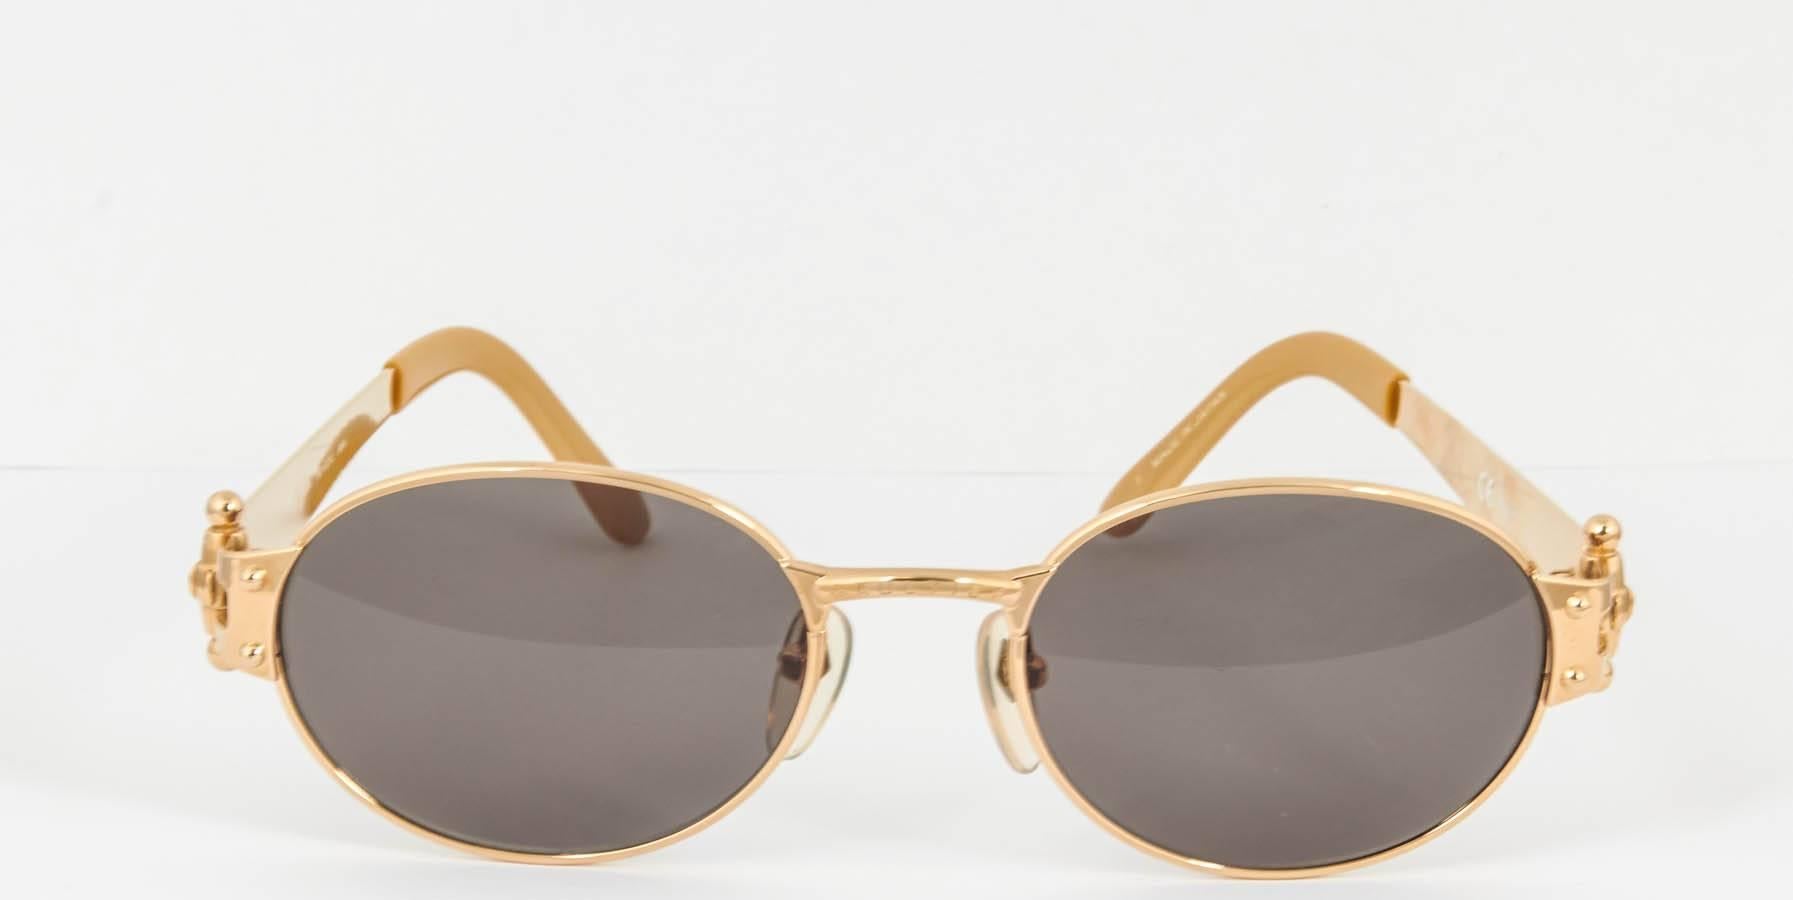 Vintage Jean Paul Gaultier Sunglasses 56-6104 In Excellent Condition For Sale In Chicago, IL